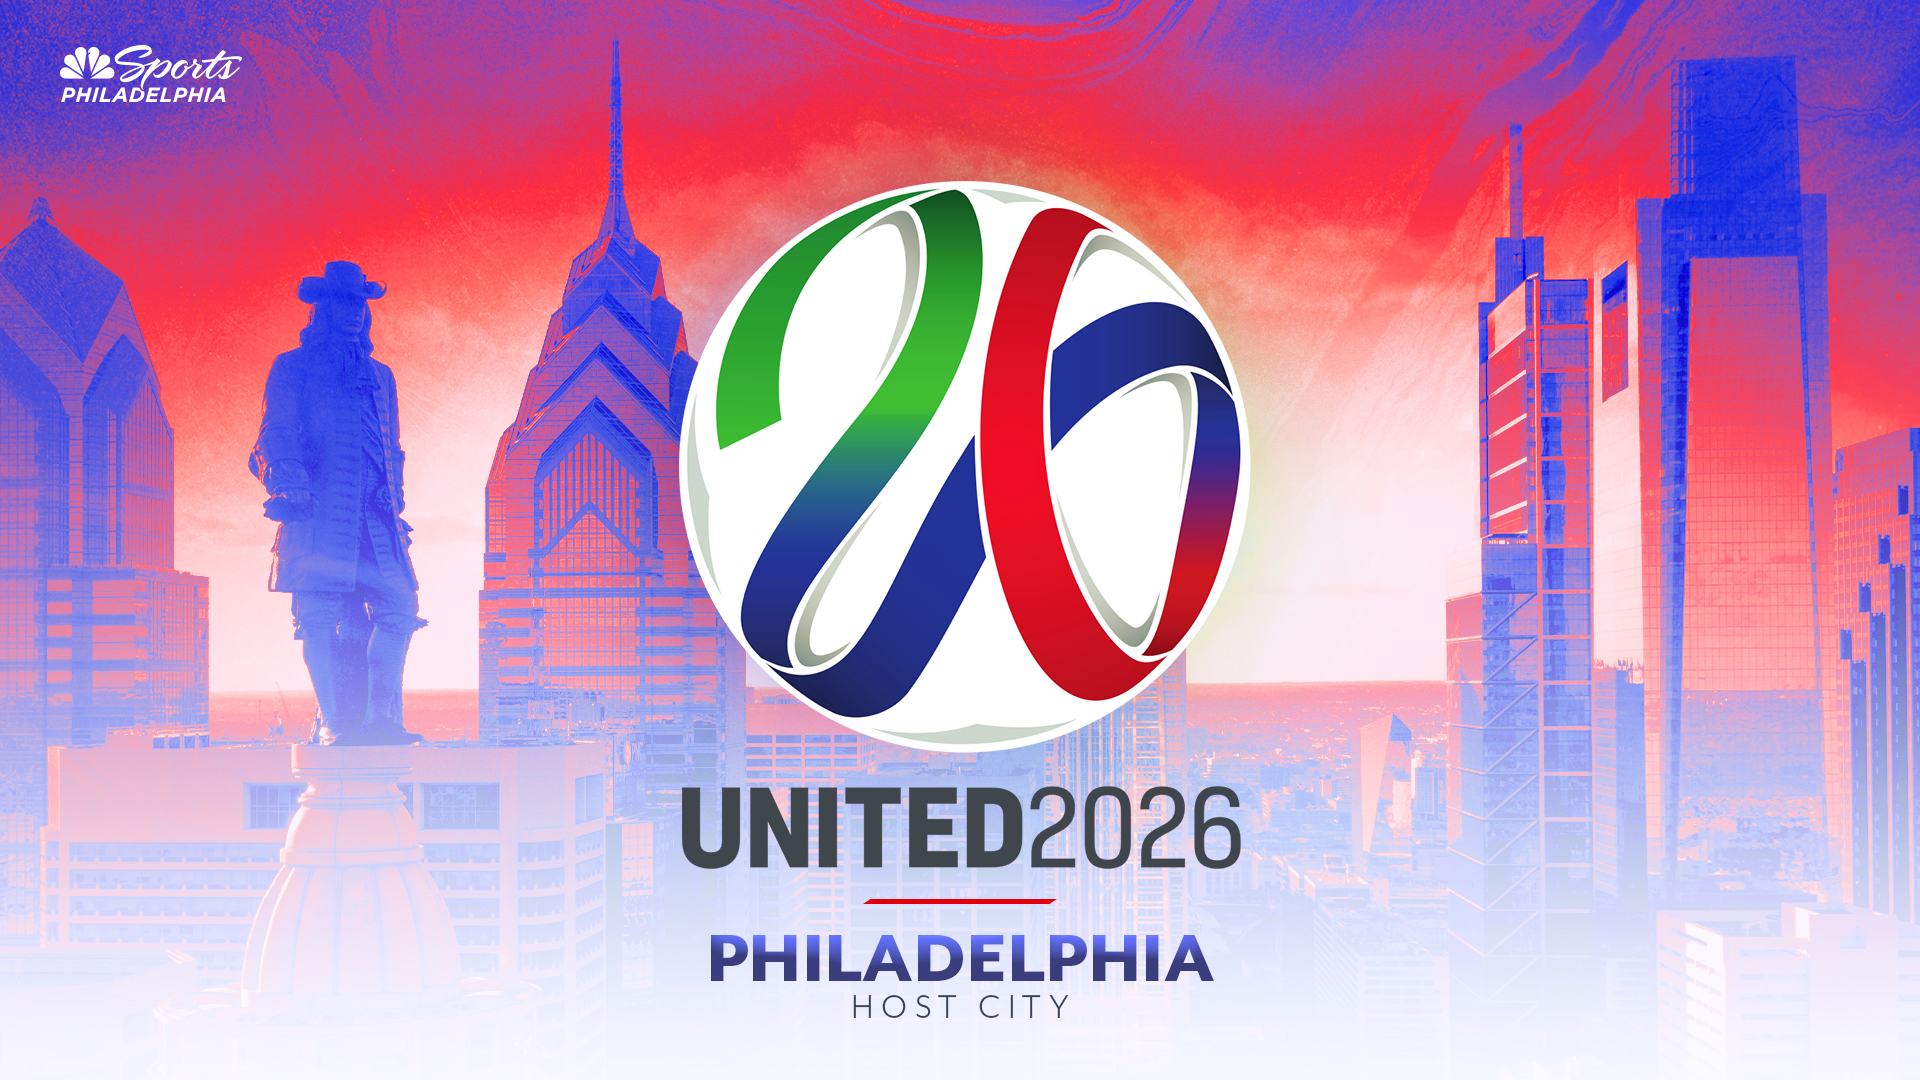 How Much are 2022 FIFA World Cup Tickets? – NBC10 Philadelphia